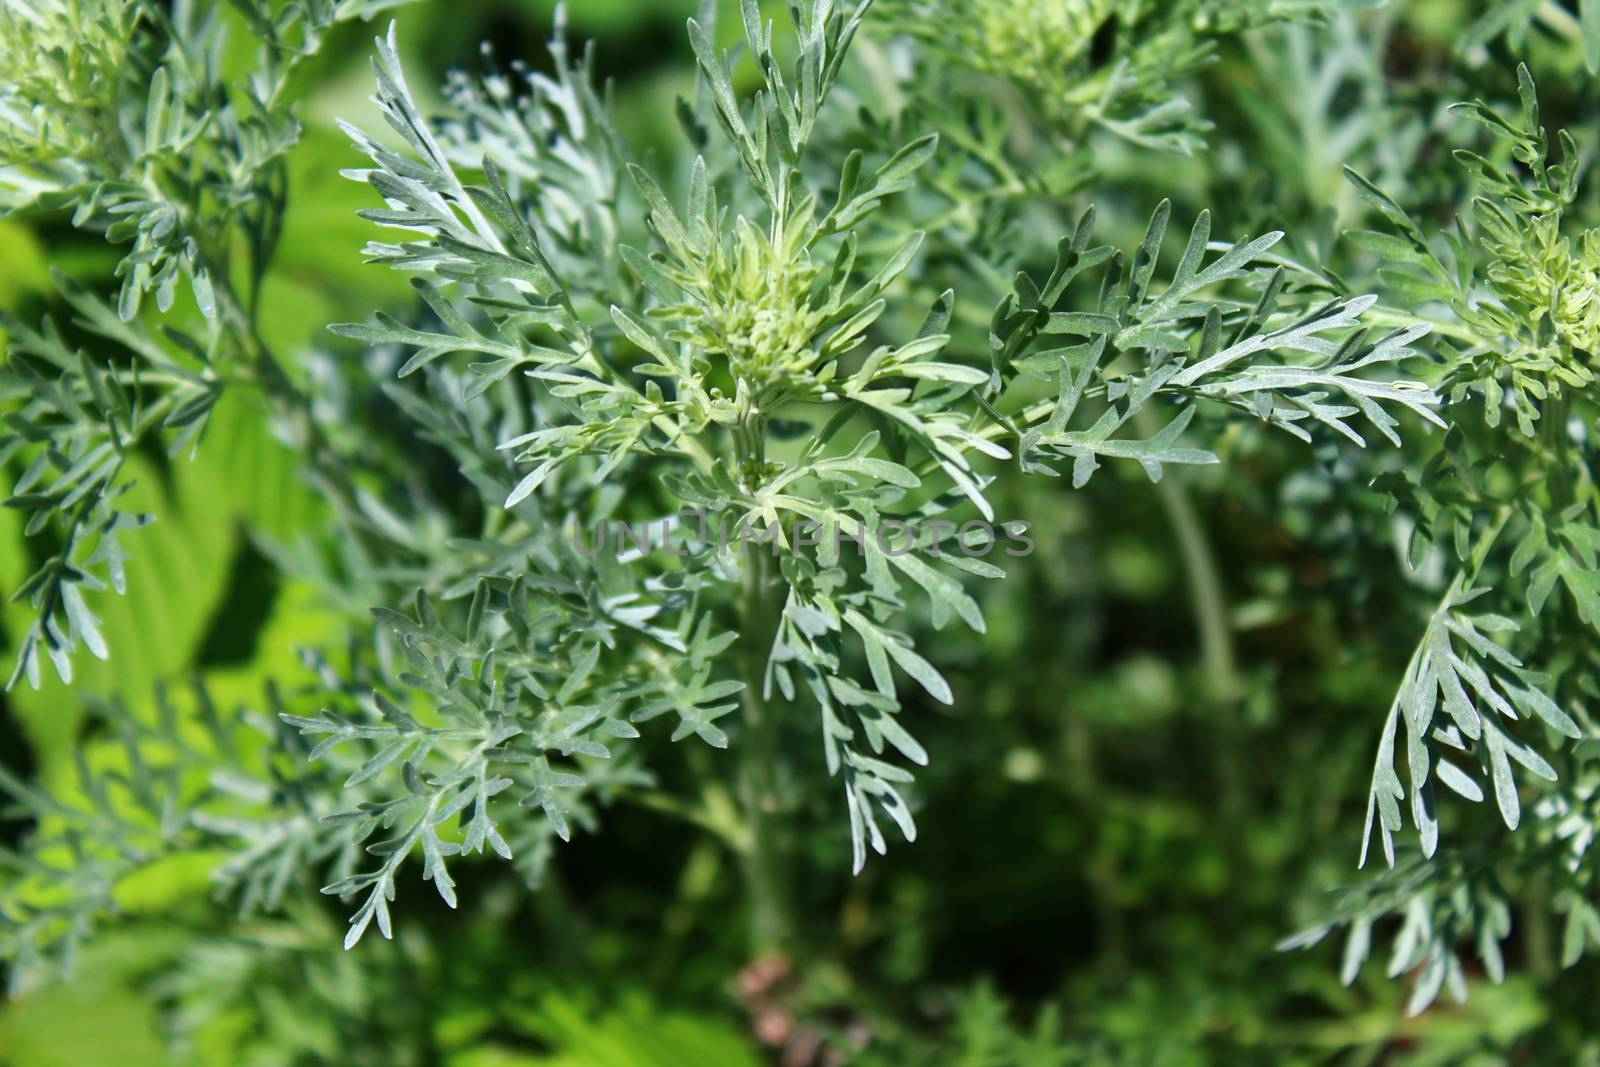 The picture shows healthy wormwood in the garden.